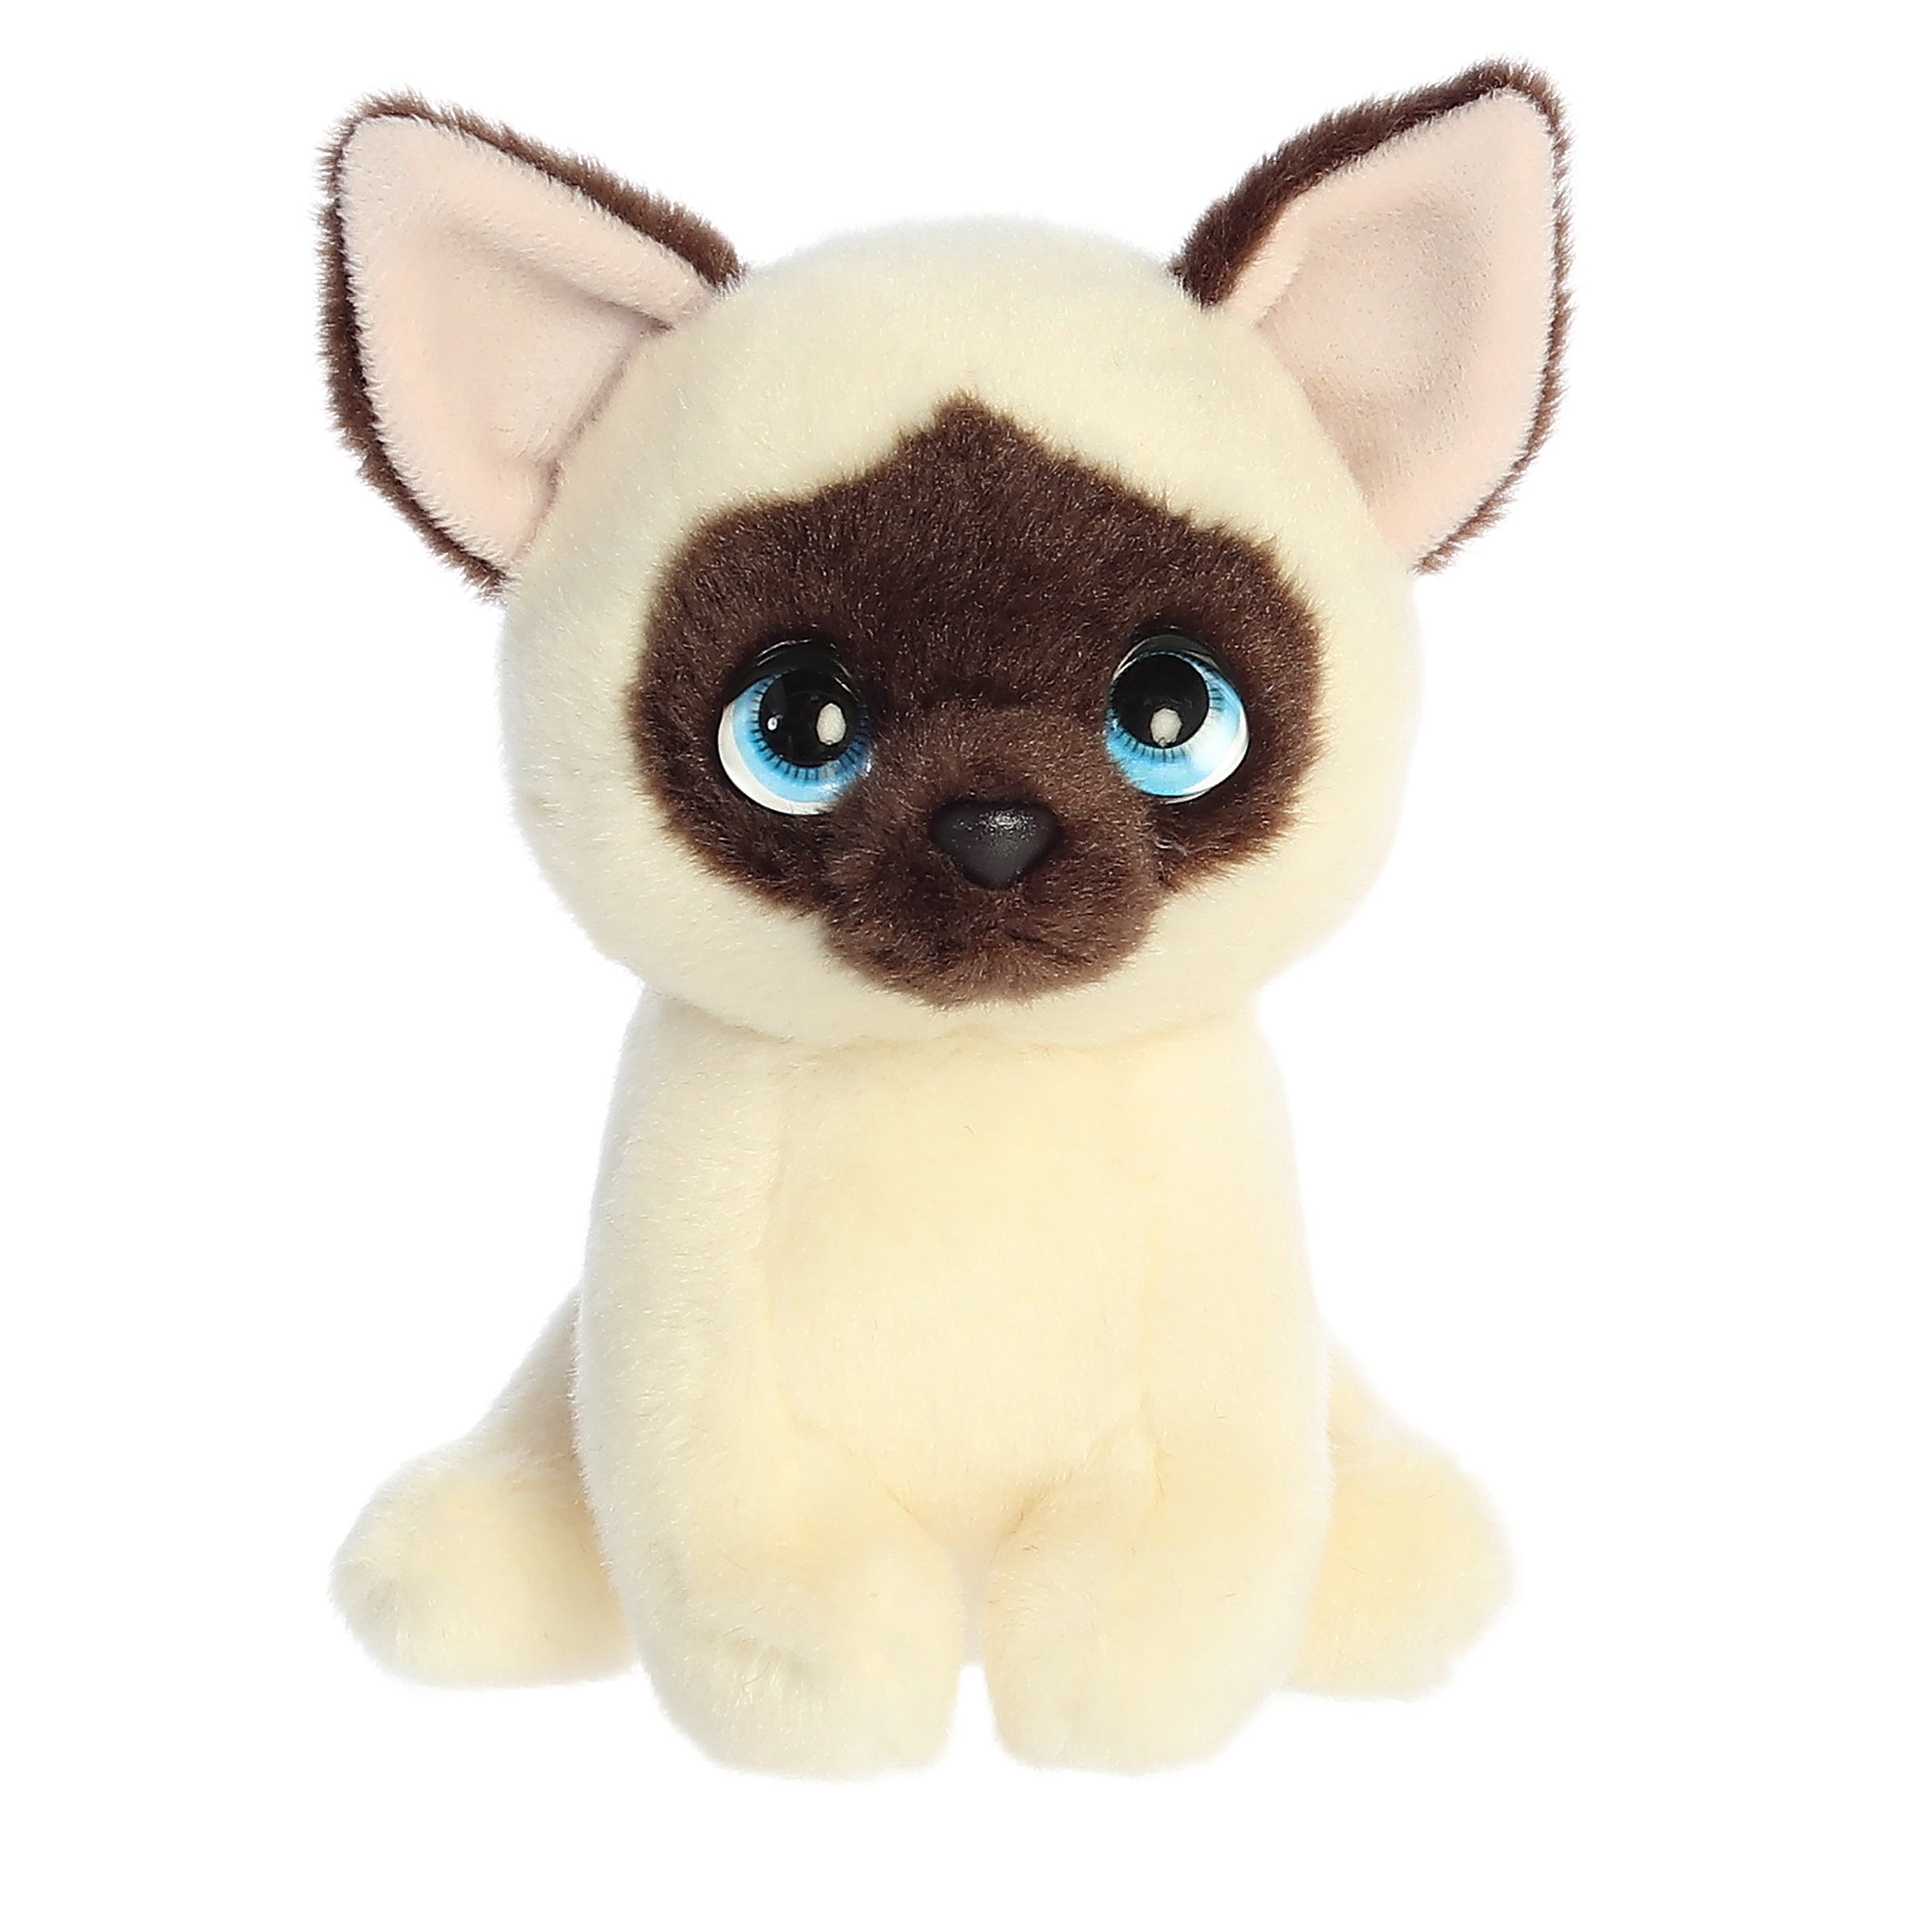 Siamese cat plush with a white coat and brown mask, twinkling eyes, part of the enchanting Petites collection by Aurora